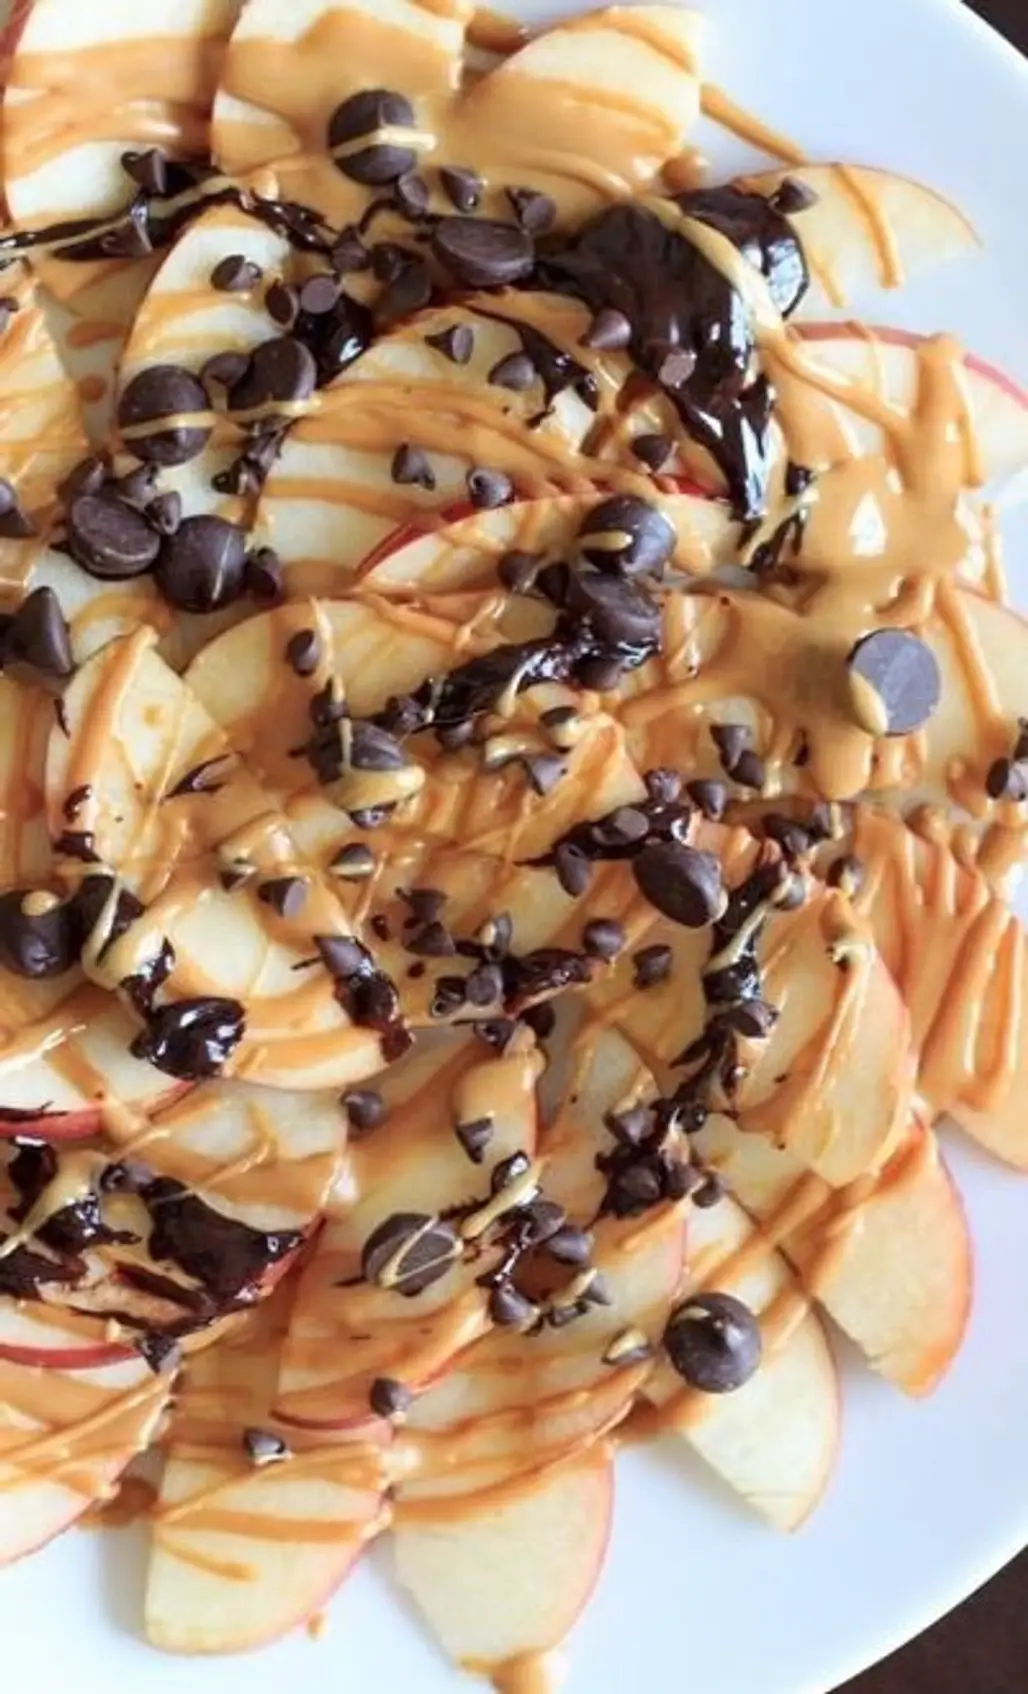 Apple “Nachos” with Peanut Butter & Chocolate Drizzle